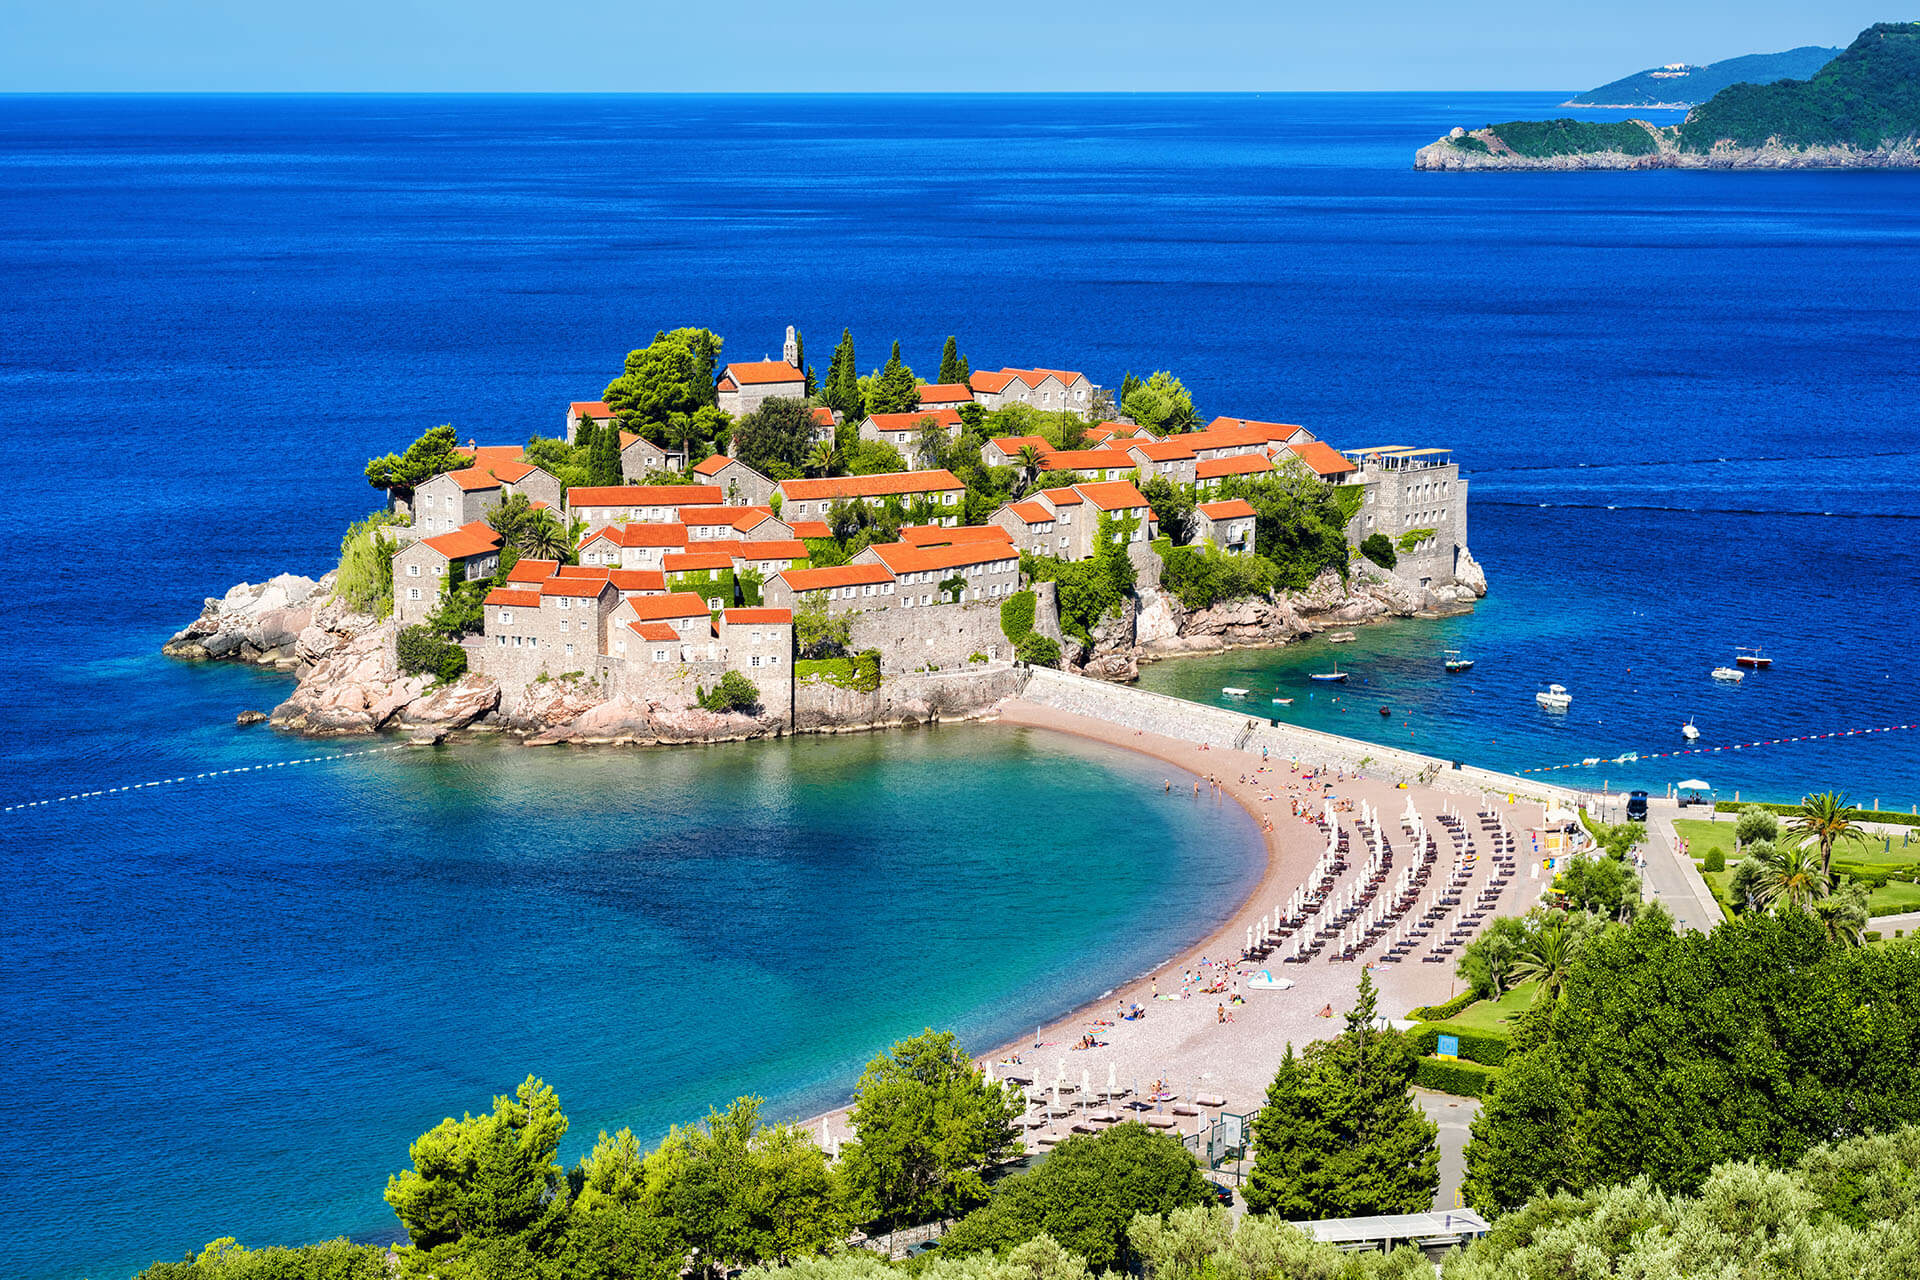 Montenegro: Digital Nomads will be Granted Temporary Residence Permits